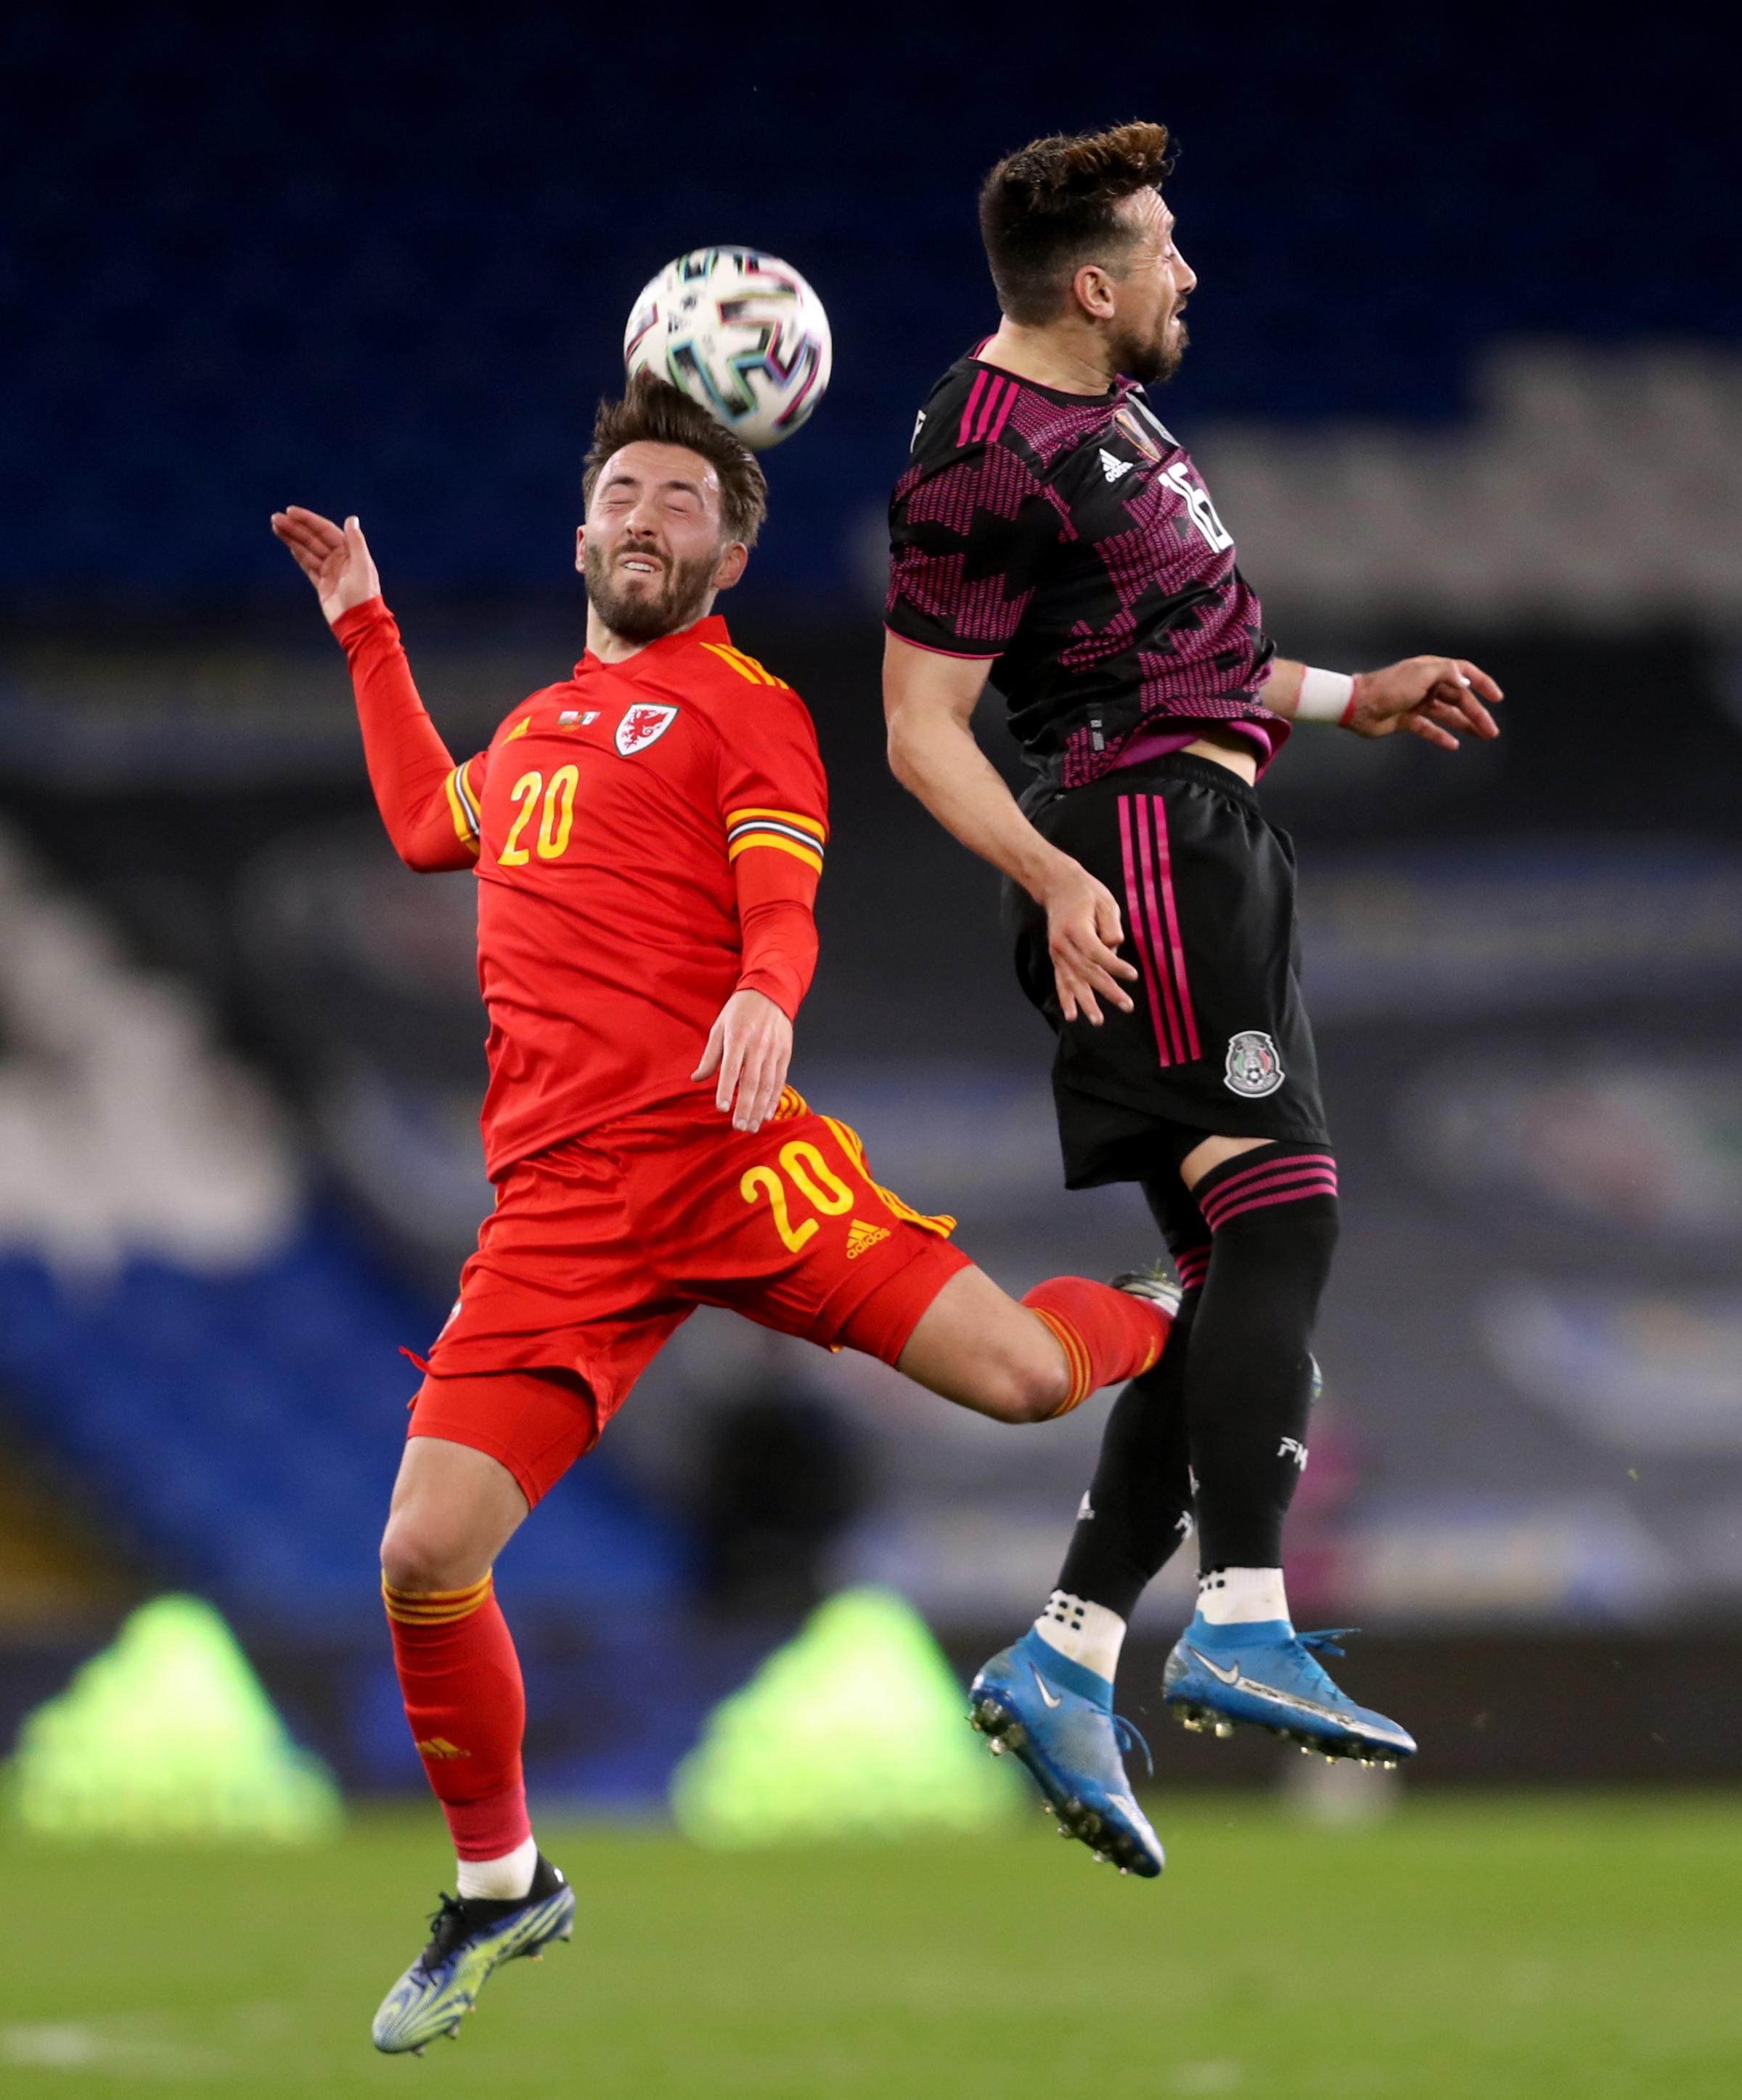 Wales Josh Sheehan (left) and Mexicos Hector Herrera battle for the ball during the international friendly at the Cardiff City Stadium, Cardiff. Picture date: Saturday March 27, 2021.